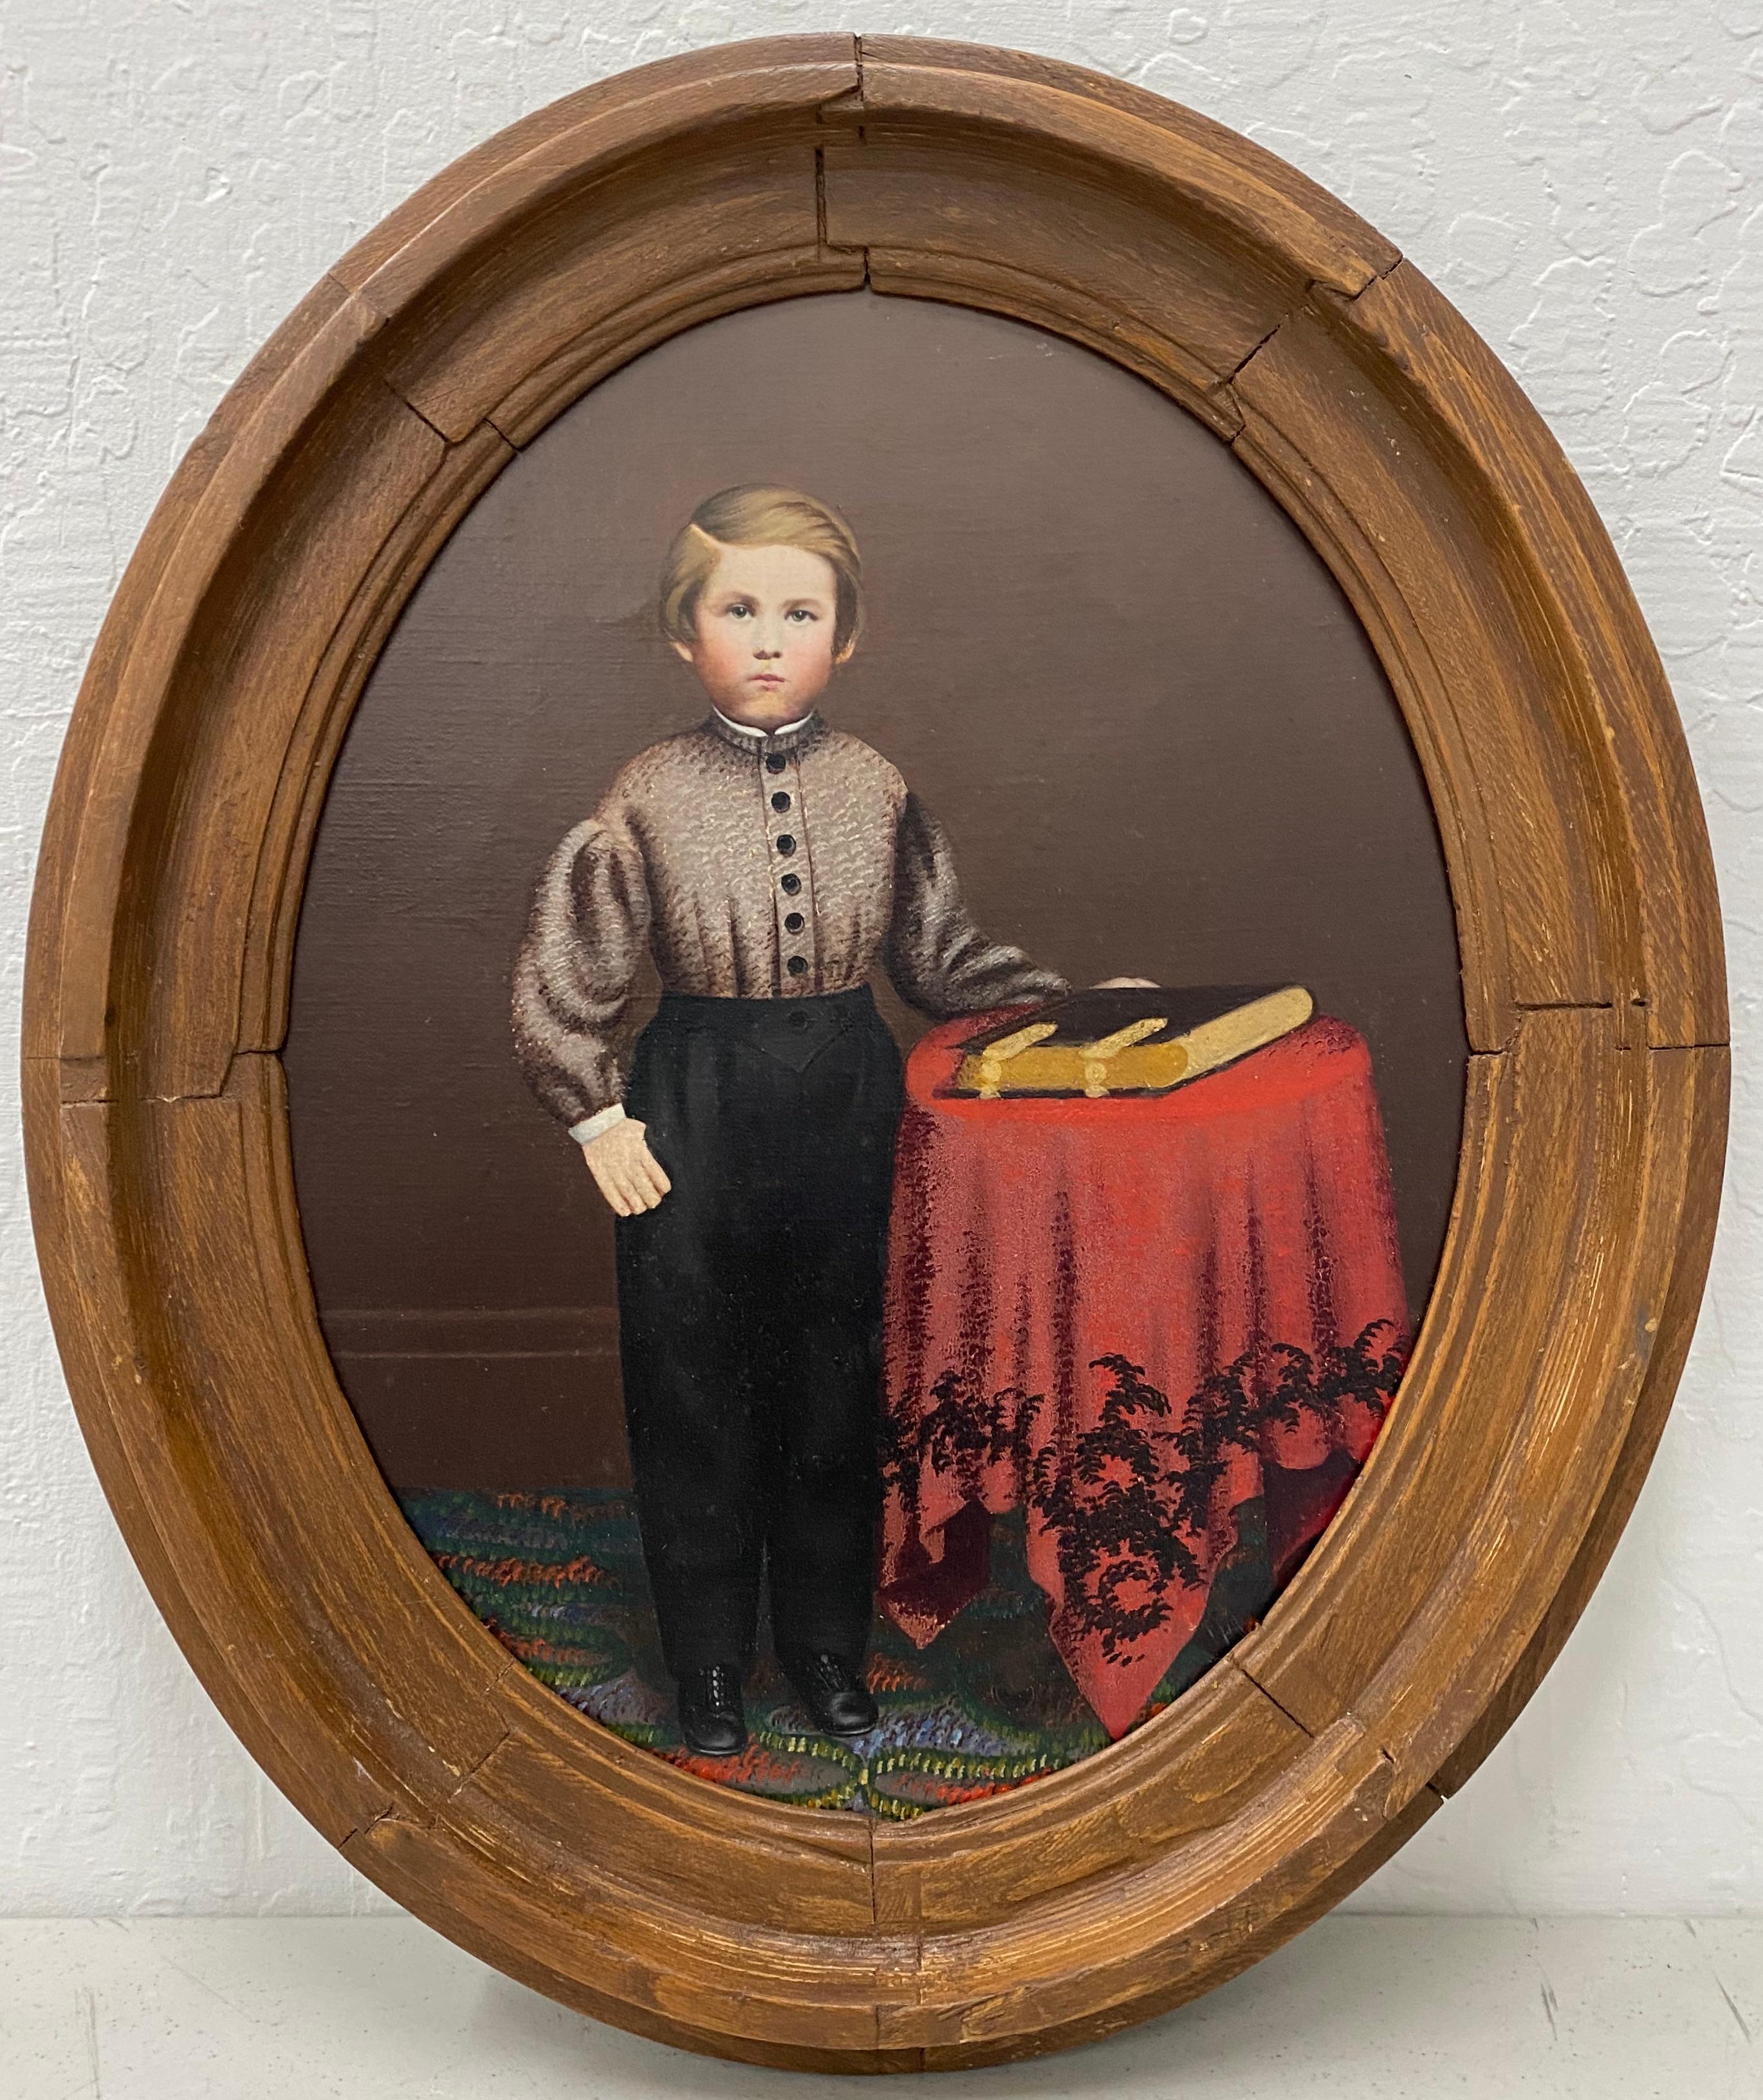 Unknown Portrait Painting - 19th c. American Oil Portrait of a Young Man with his Bible